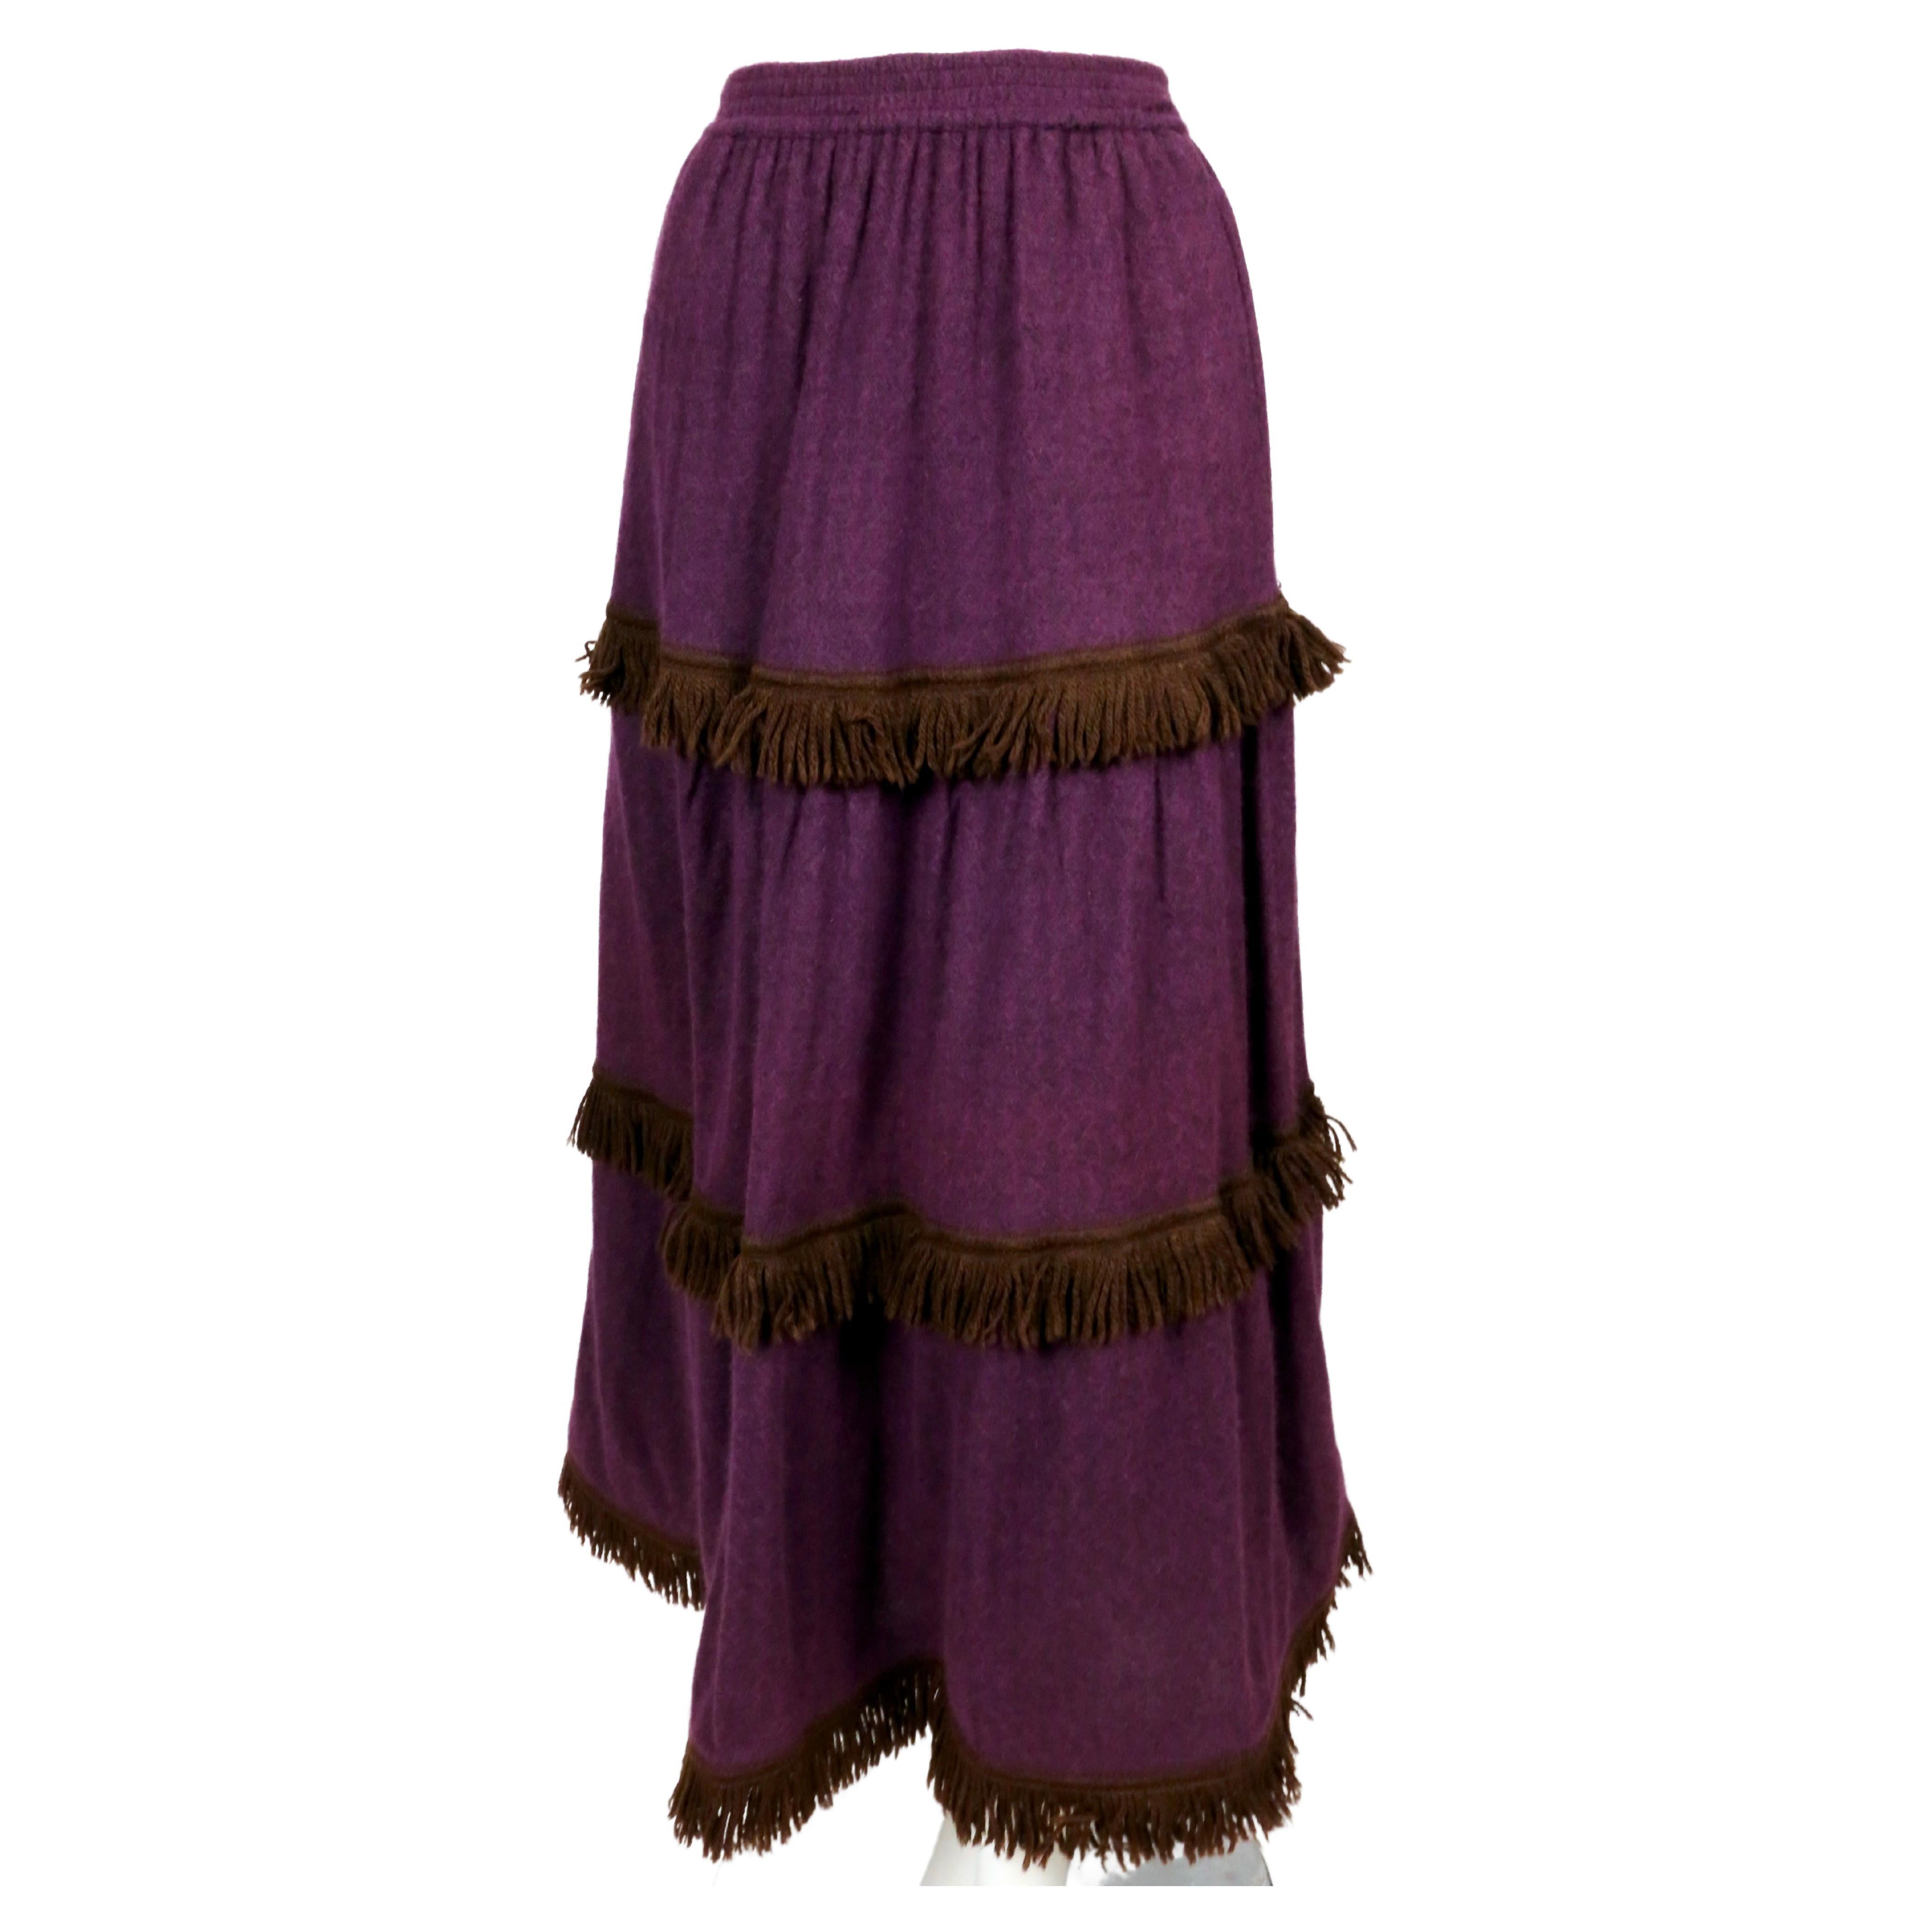 Very soft, rich purple wool skirt with brown fringed yarn trim designed by Yves Saint Laurent dating to the 1970's. No size is indicated however this was acquired with two other  identical skirts in other colors with the same measurements both